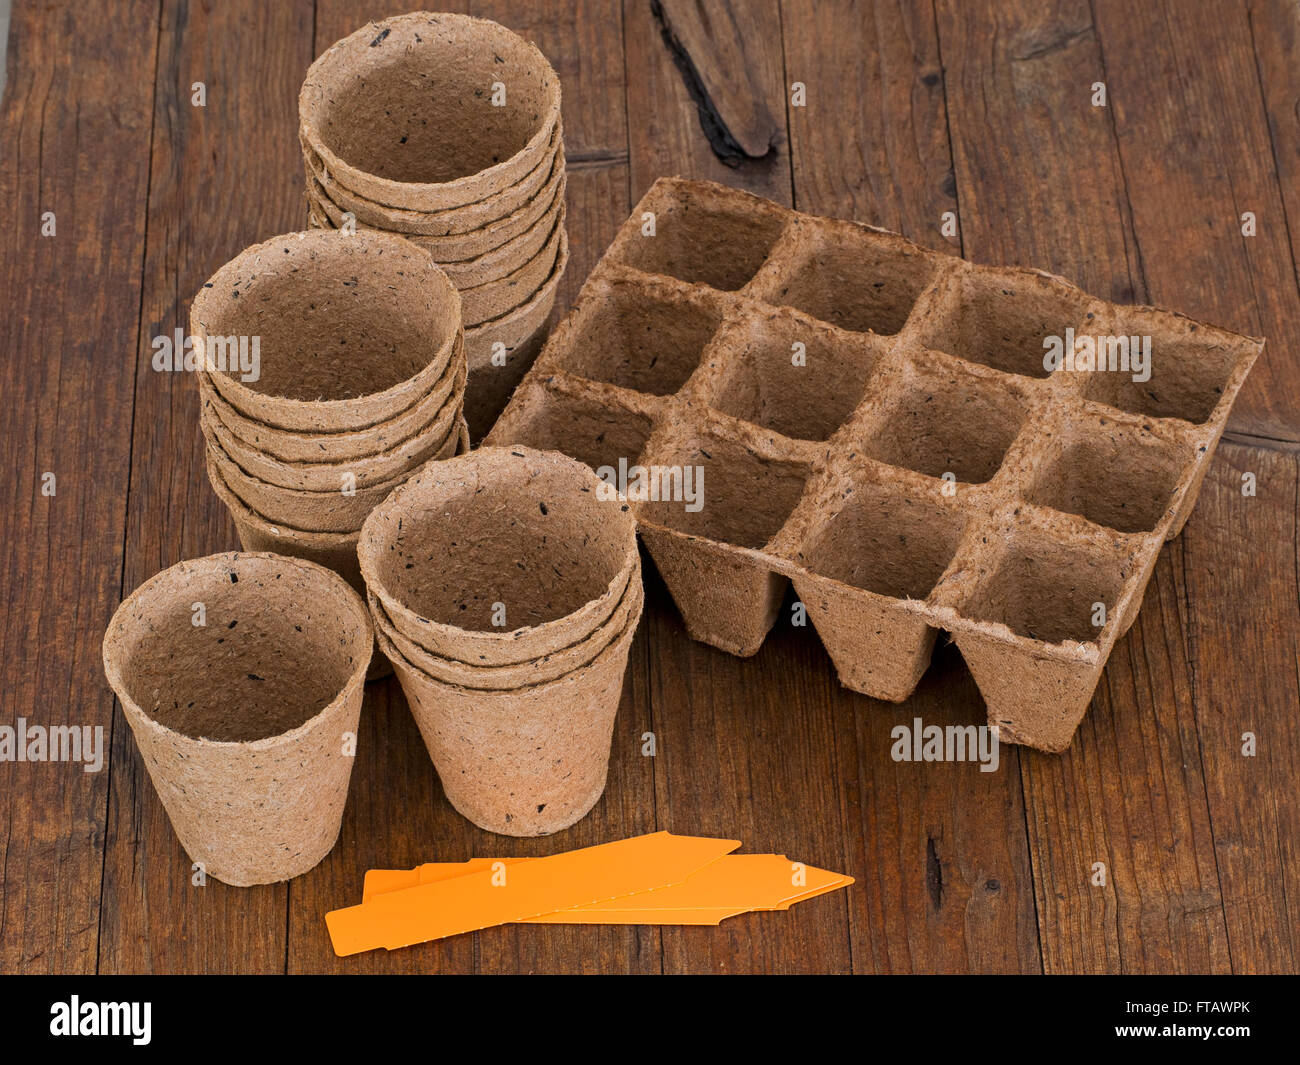 Seeds pots and labels on wooden bench. With labels. Stock Photo